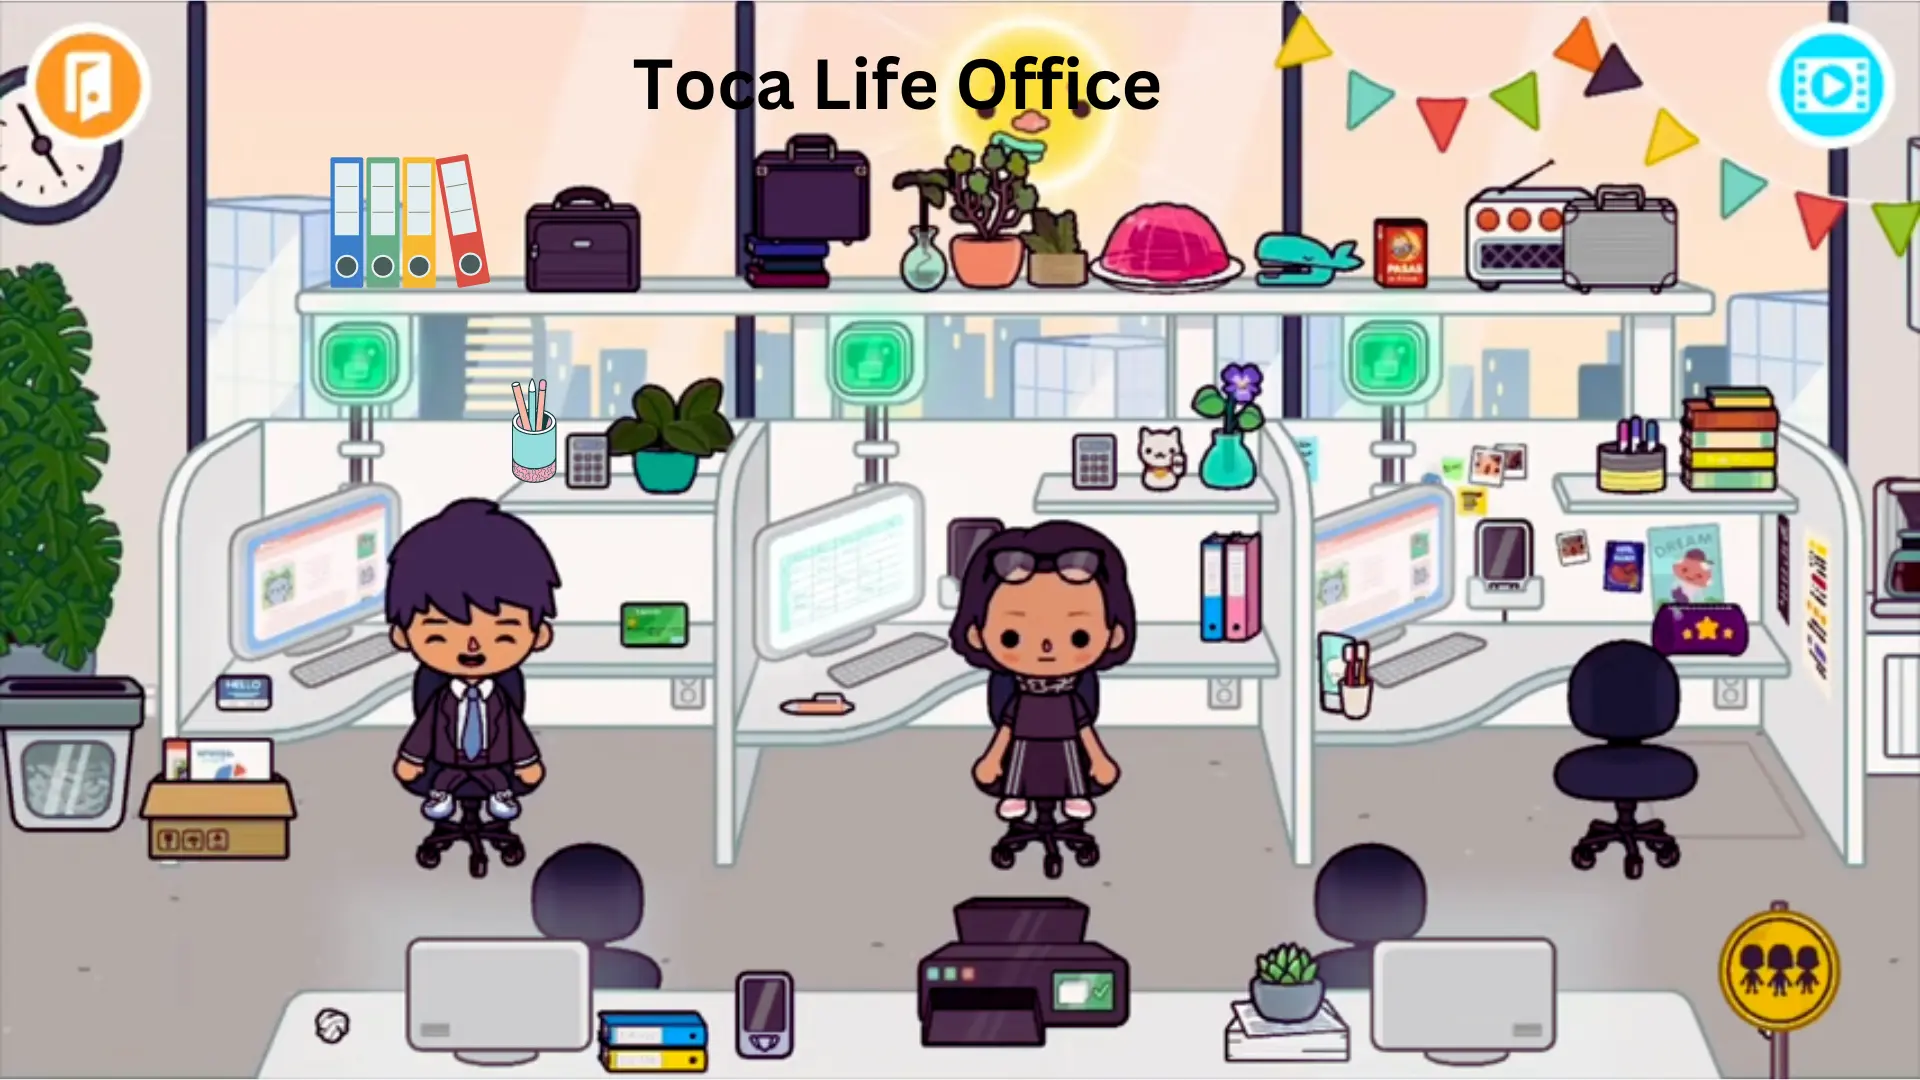 Explore roles and activities in Toca Life Office.